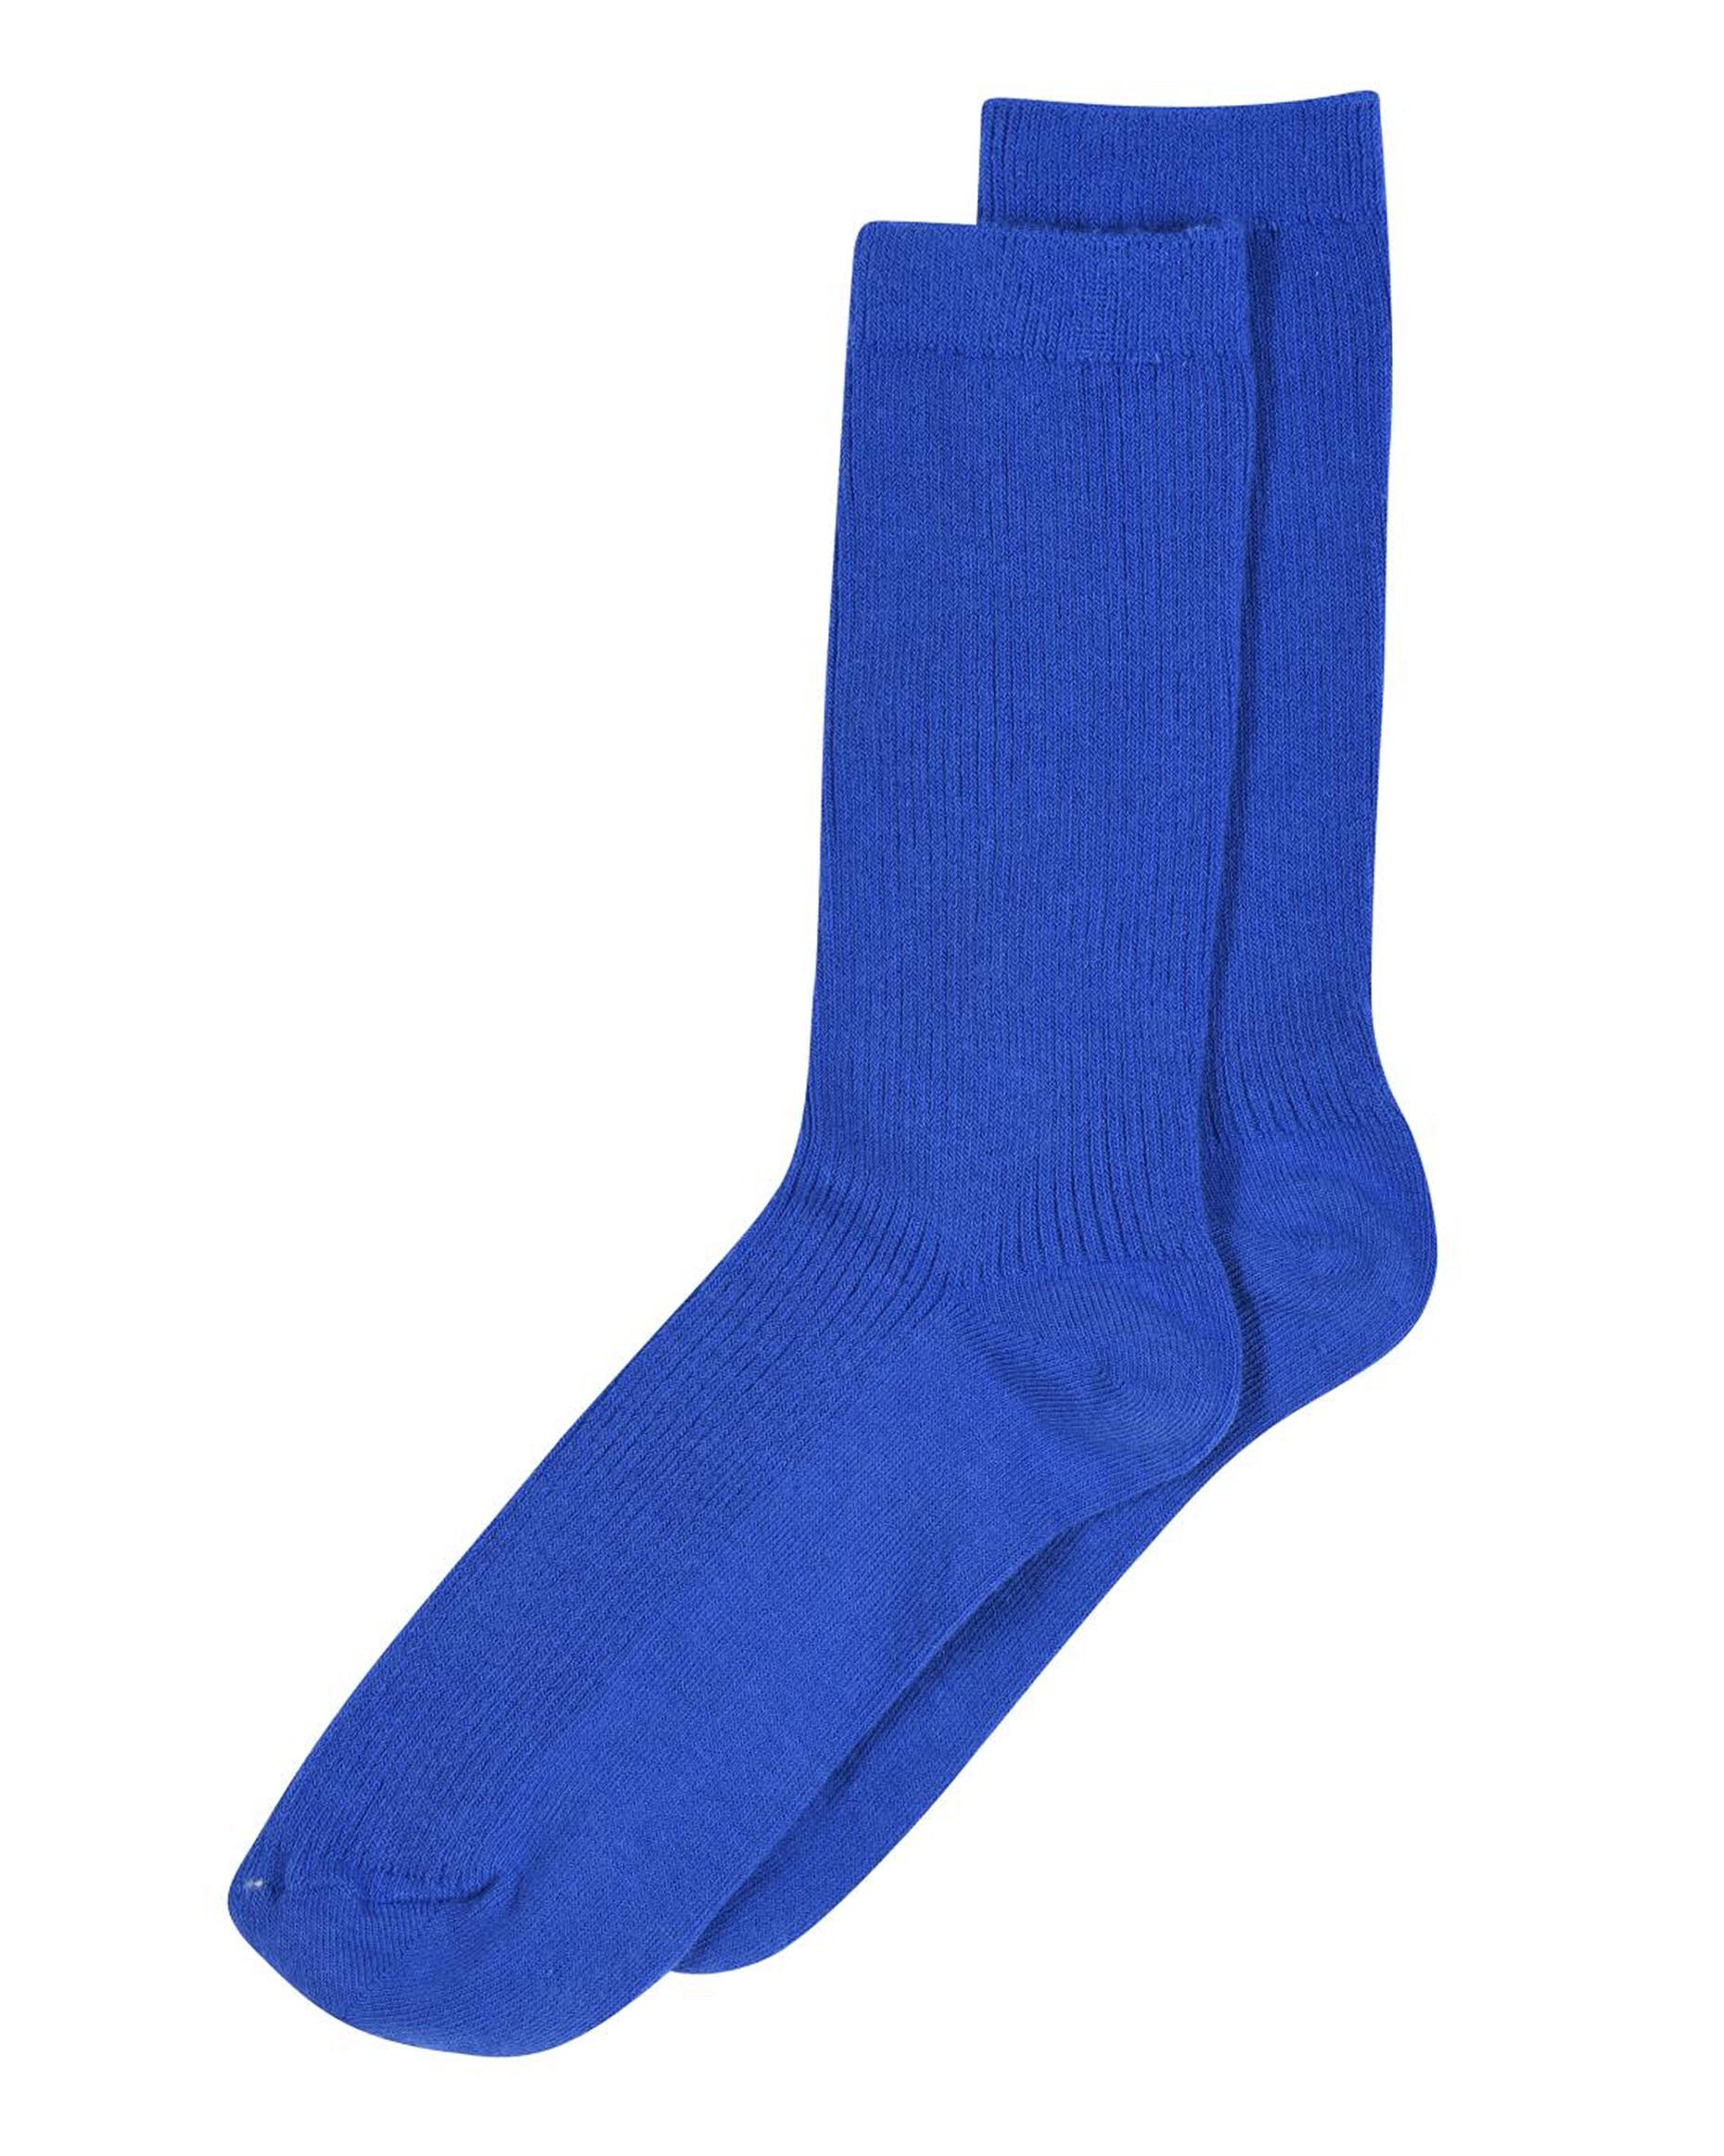 MP Fine Cotton Rib Sock - Soft and light royal blue ribbed cotton crew length ankle socks with plain cuff, plain sole, shaped heel and flat toe seam.